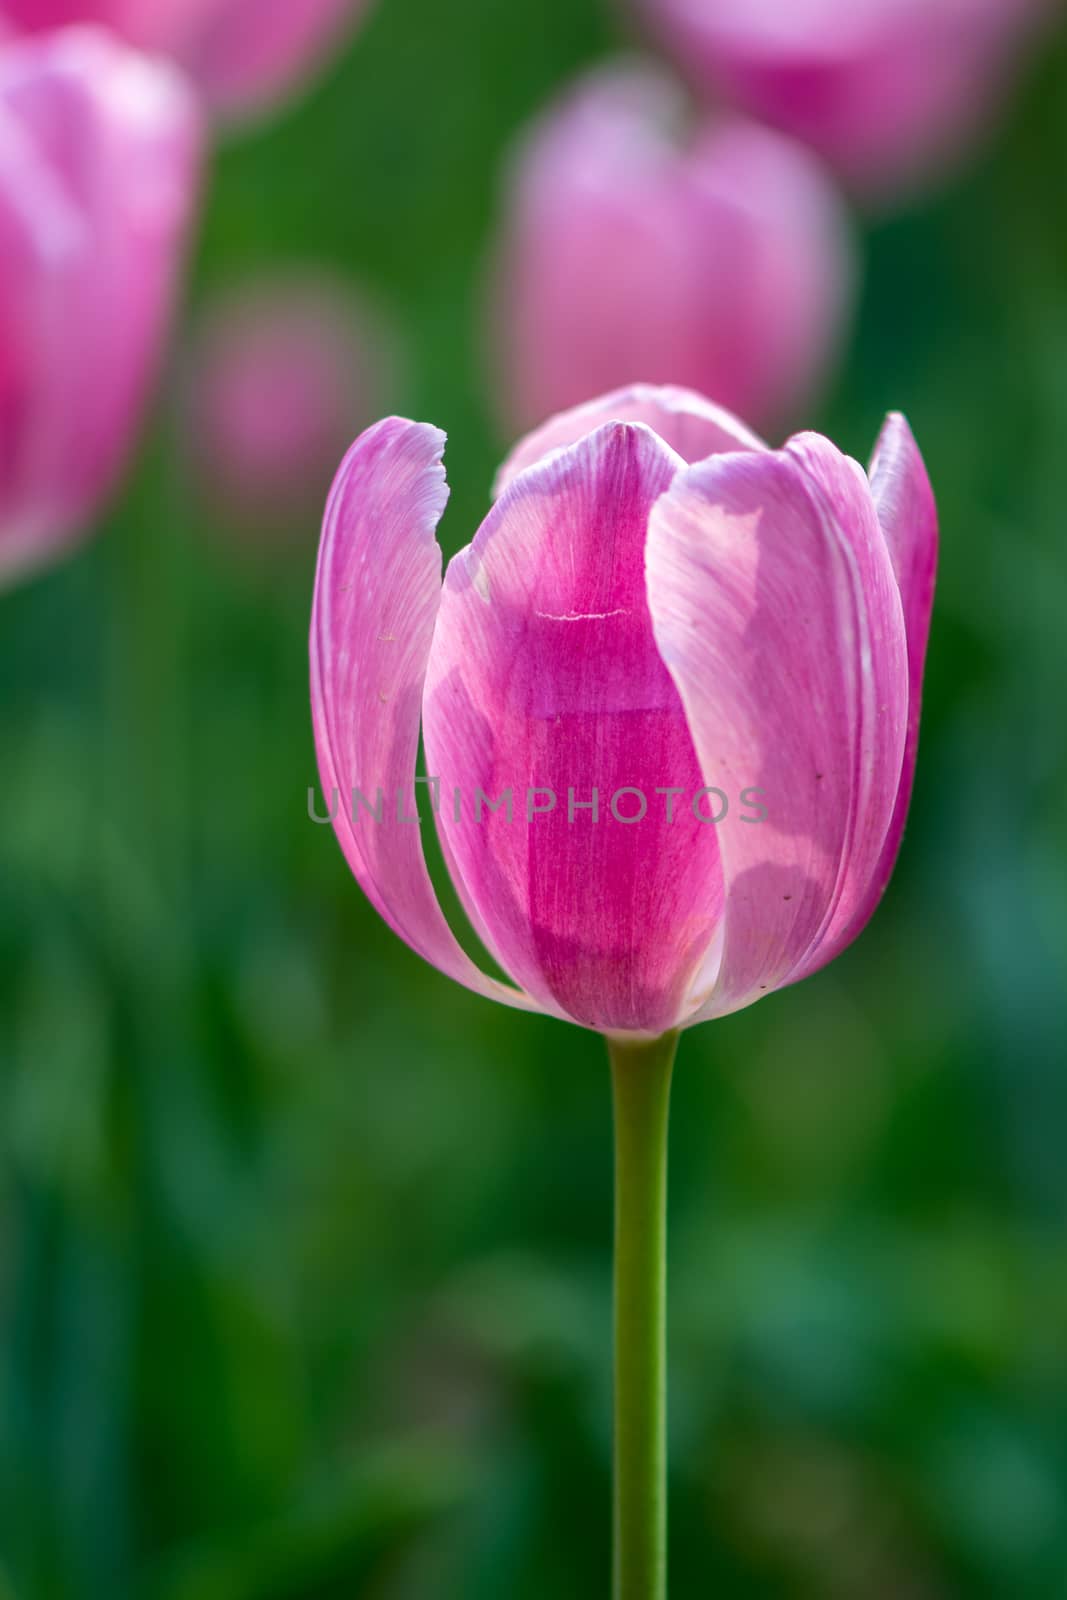 The pink tulip with green background in Beijing Botanical Garden.